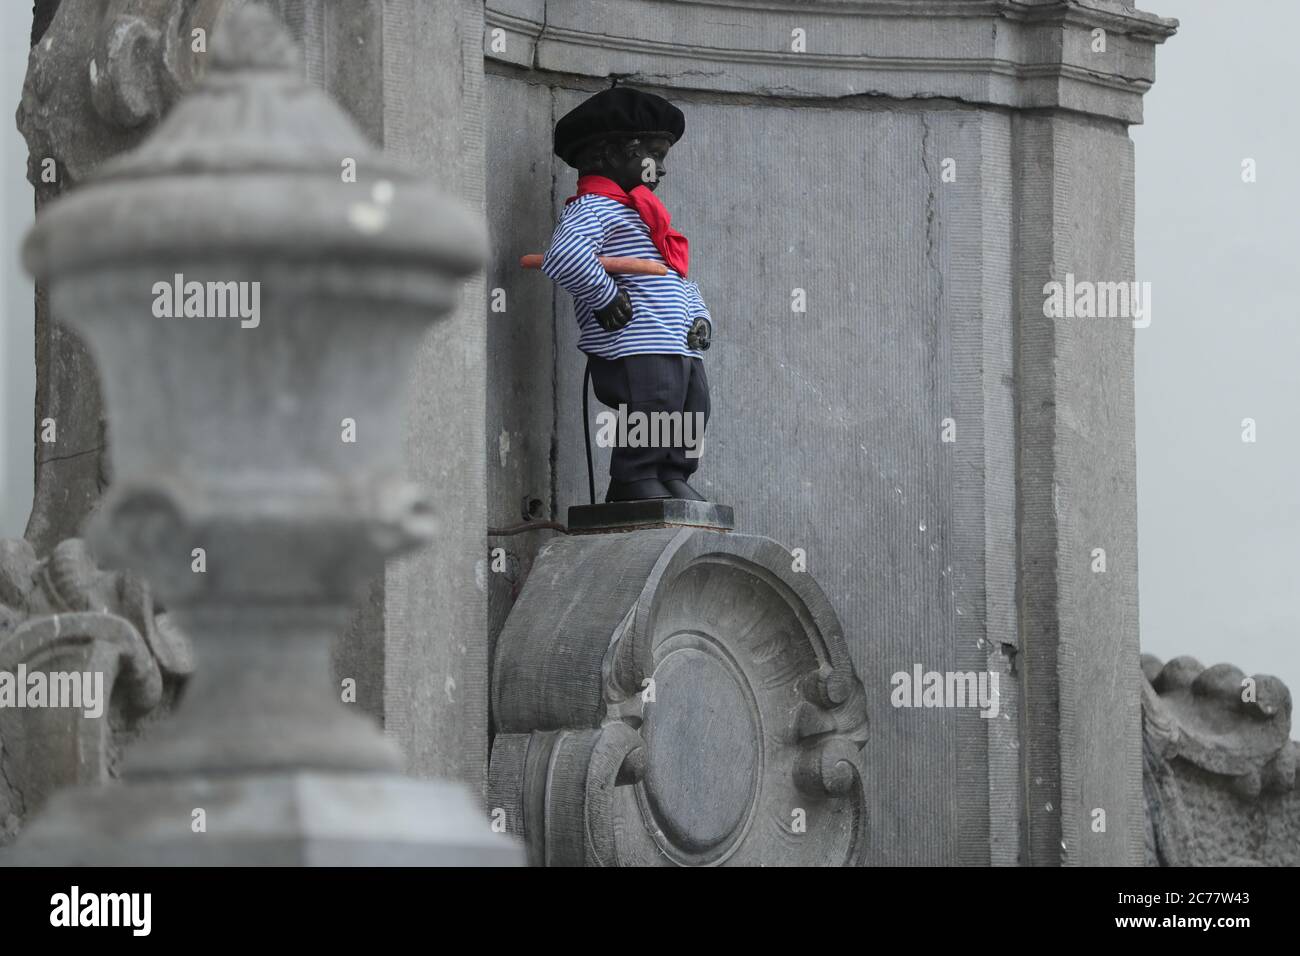 Qingdao, Belgium. 14th July, 2020. The Manneken-Pis is seen in a suit with beret and baguette in Brussels, Belgium, July 14, 2020. Manneken-Pis, the symbol of Brussels folklore, gets costumes at major events. He wore a suit with beret and baguette on Tuesday to commemorate the French national day which falls on July 14 every year. Credit: Zheng Huansong/Xinhua/Alamy Live News Stock Photo